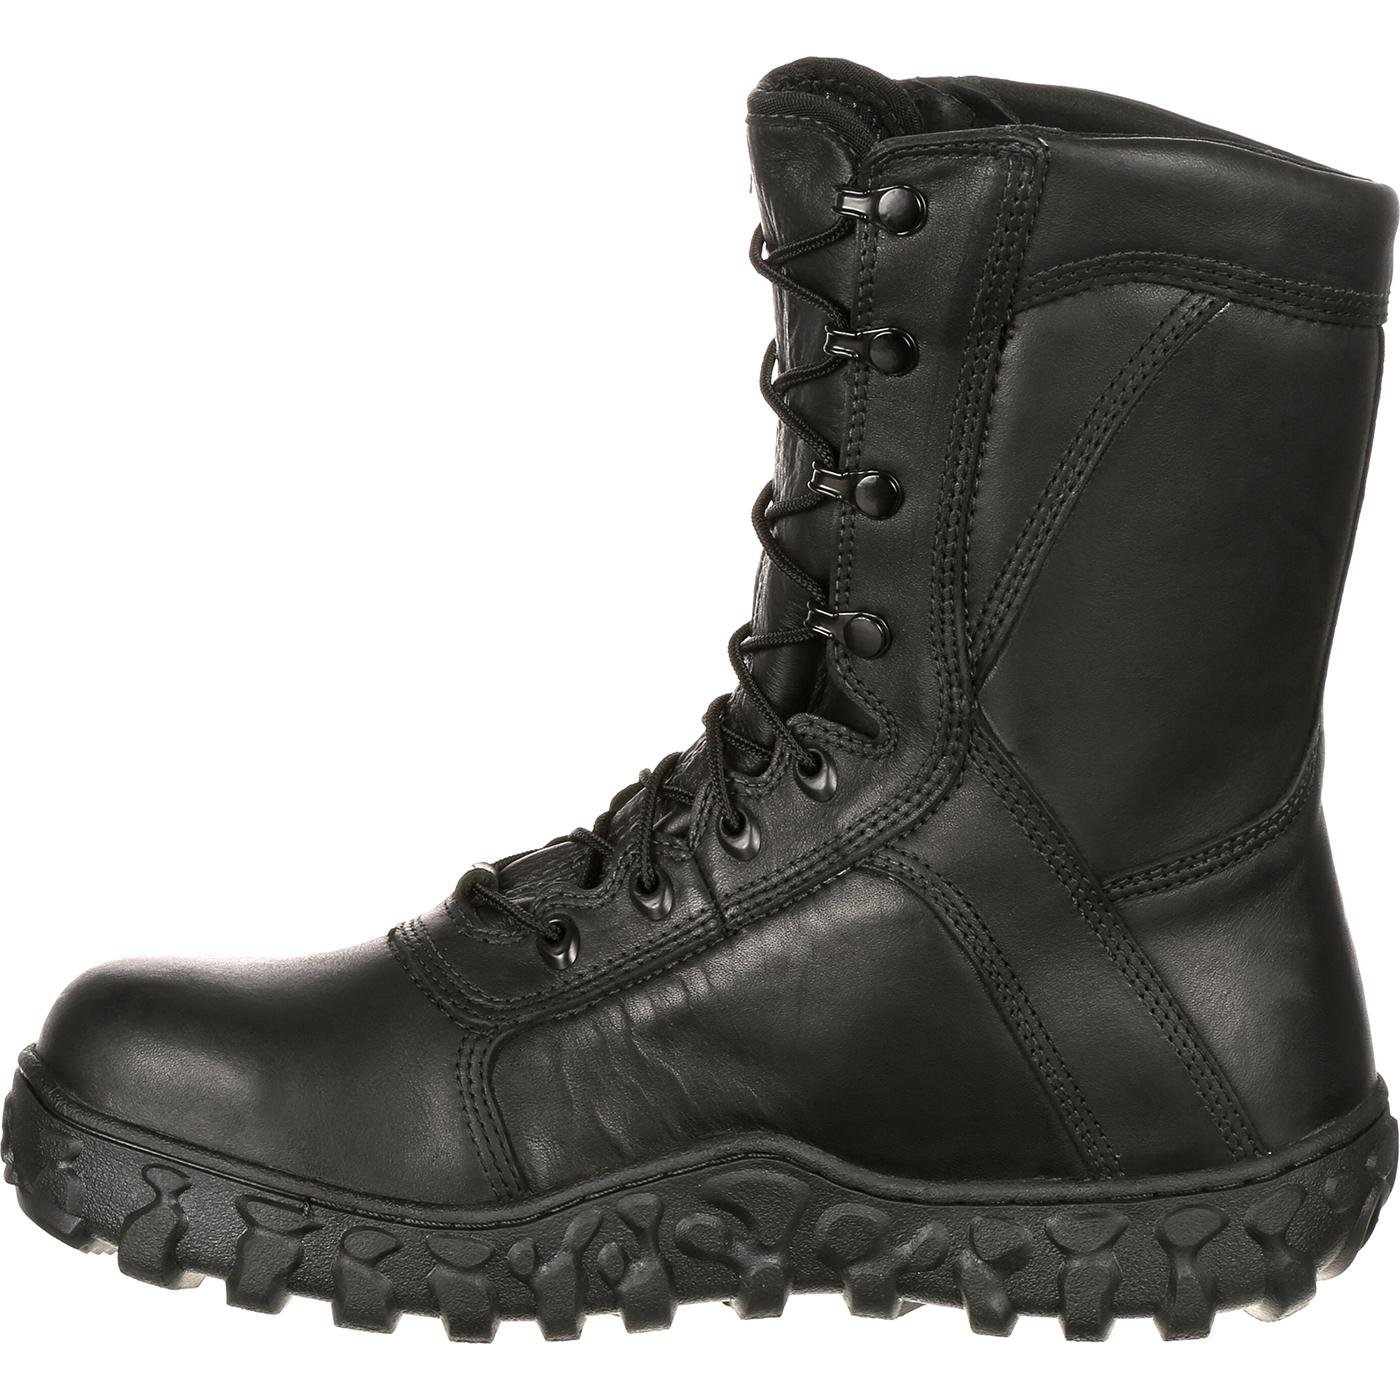 Steel Toe Tactical Military Boot made in USA, Rocky S2V